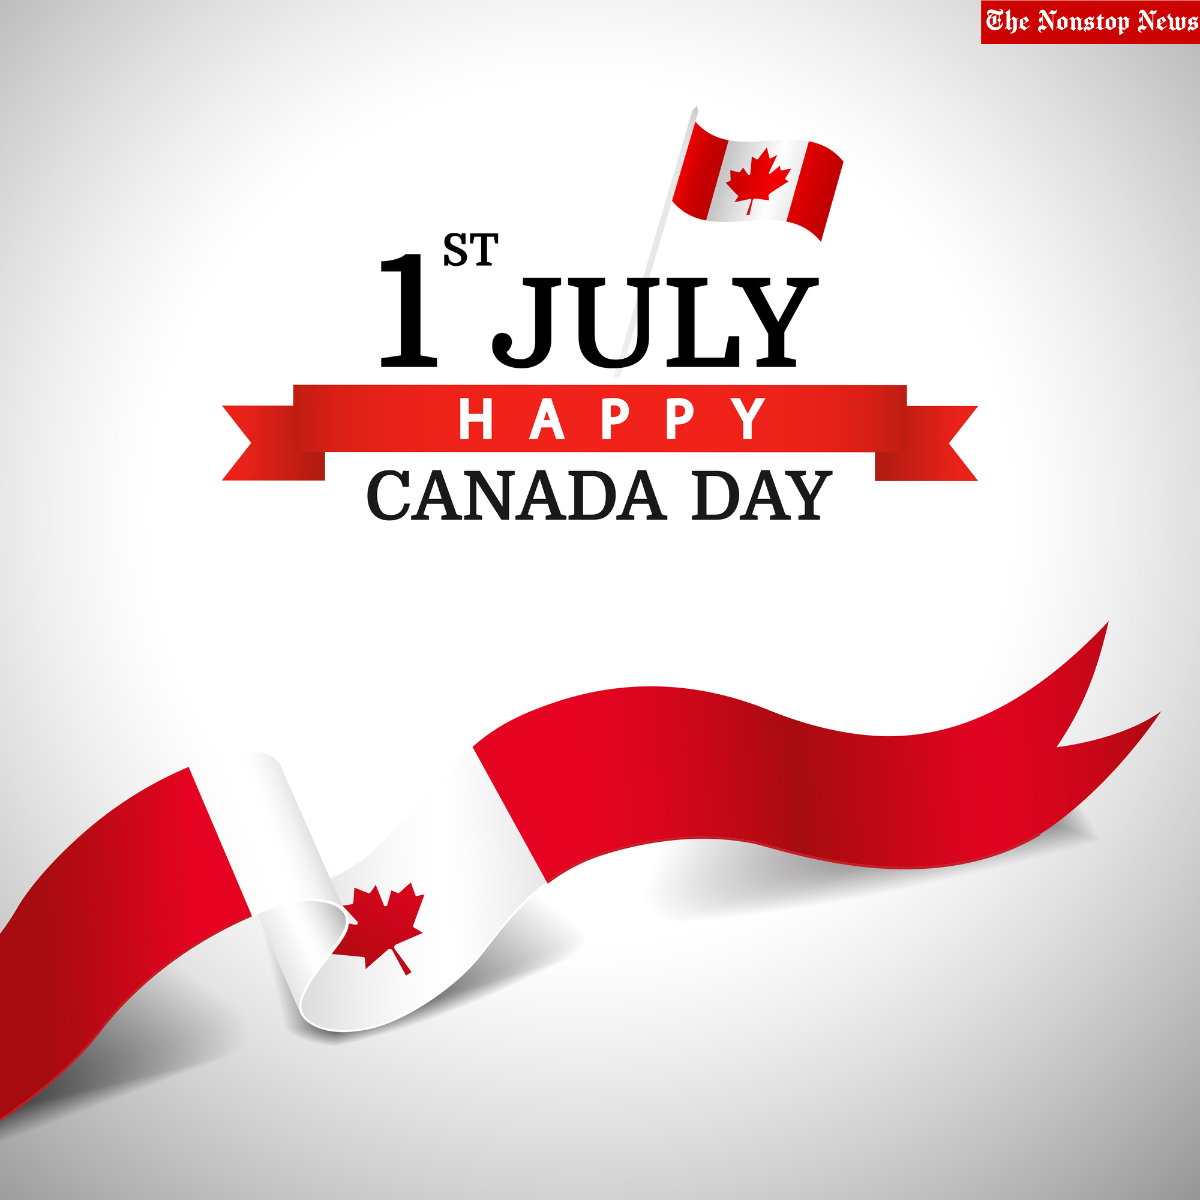 Happy Canada Day 2022: Wishes, Images, Messages, Greetings, Posters, Sayings To Share